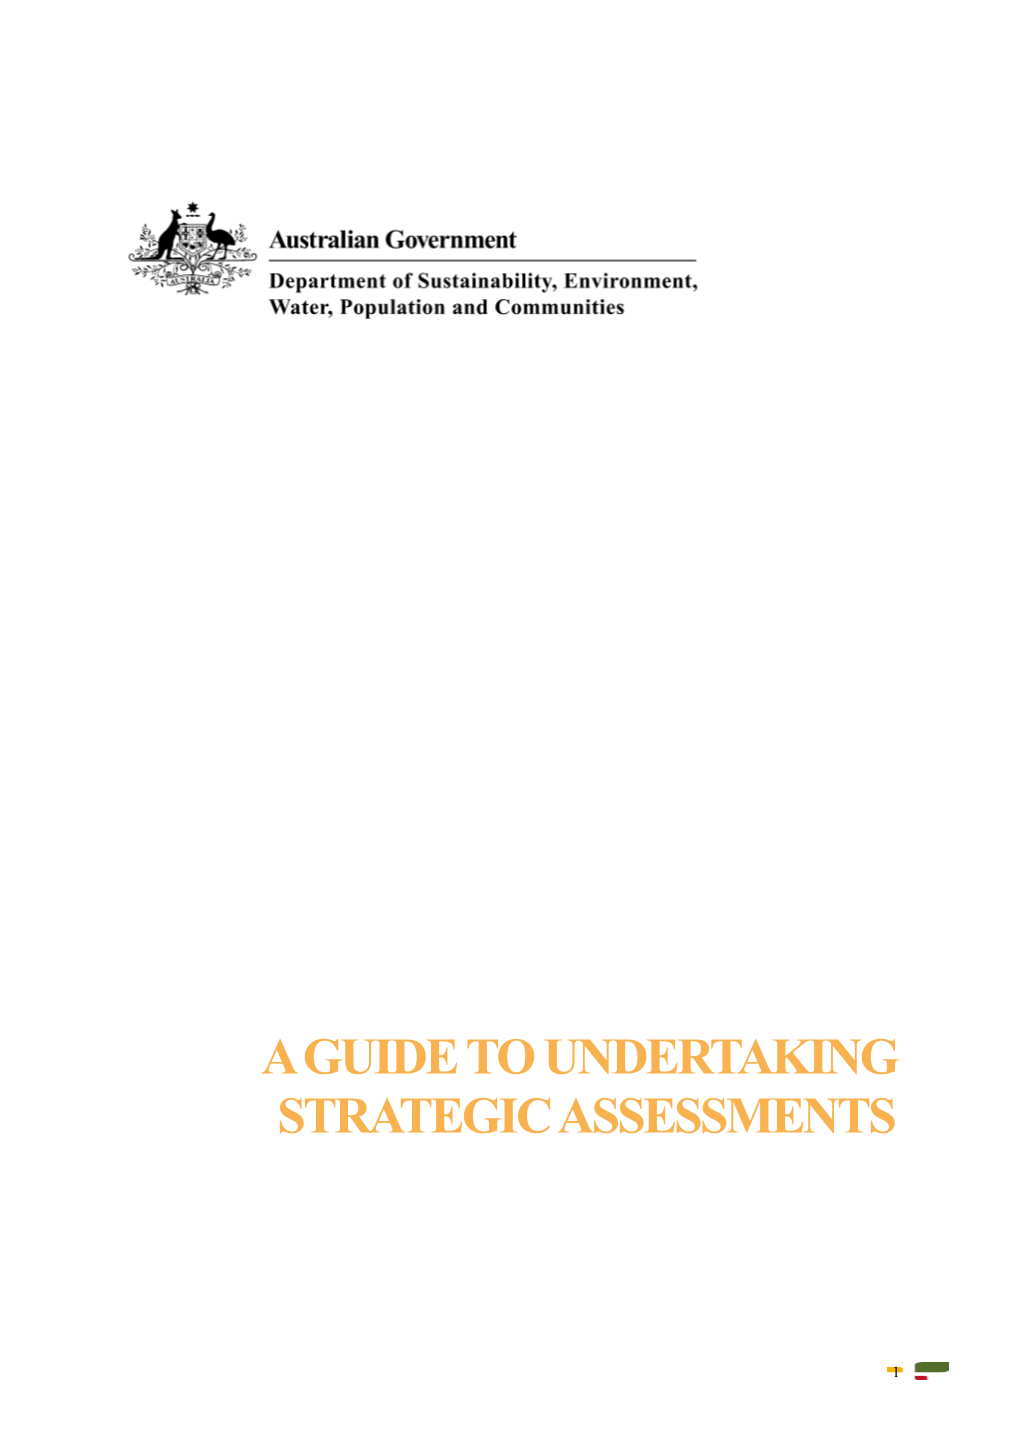 A Guide to Undertaking Strategic Assessments